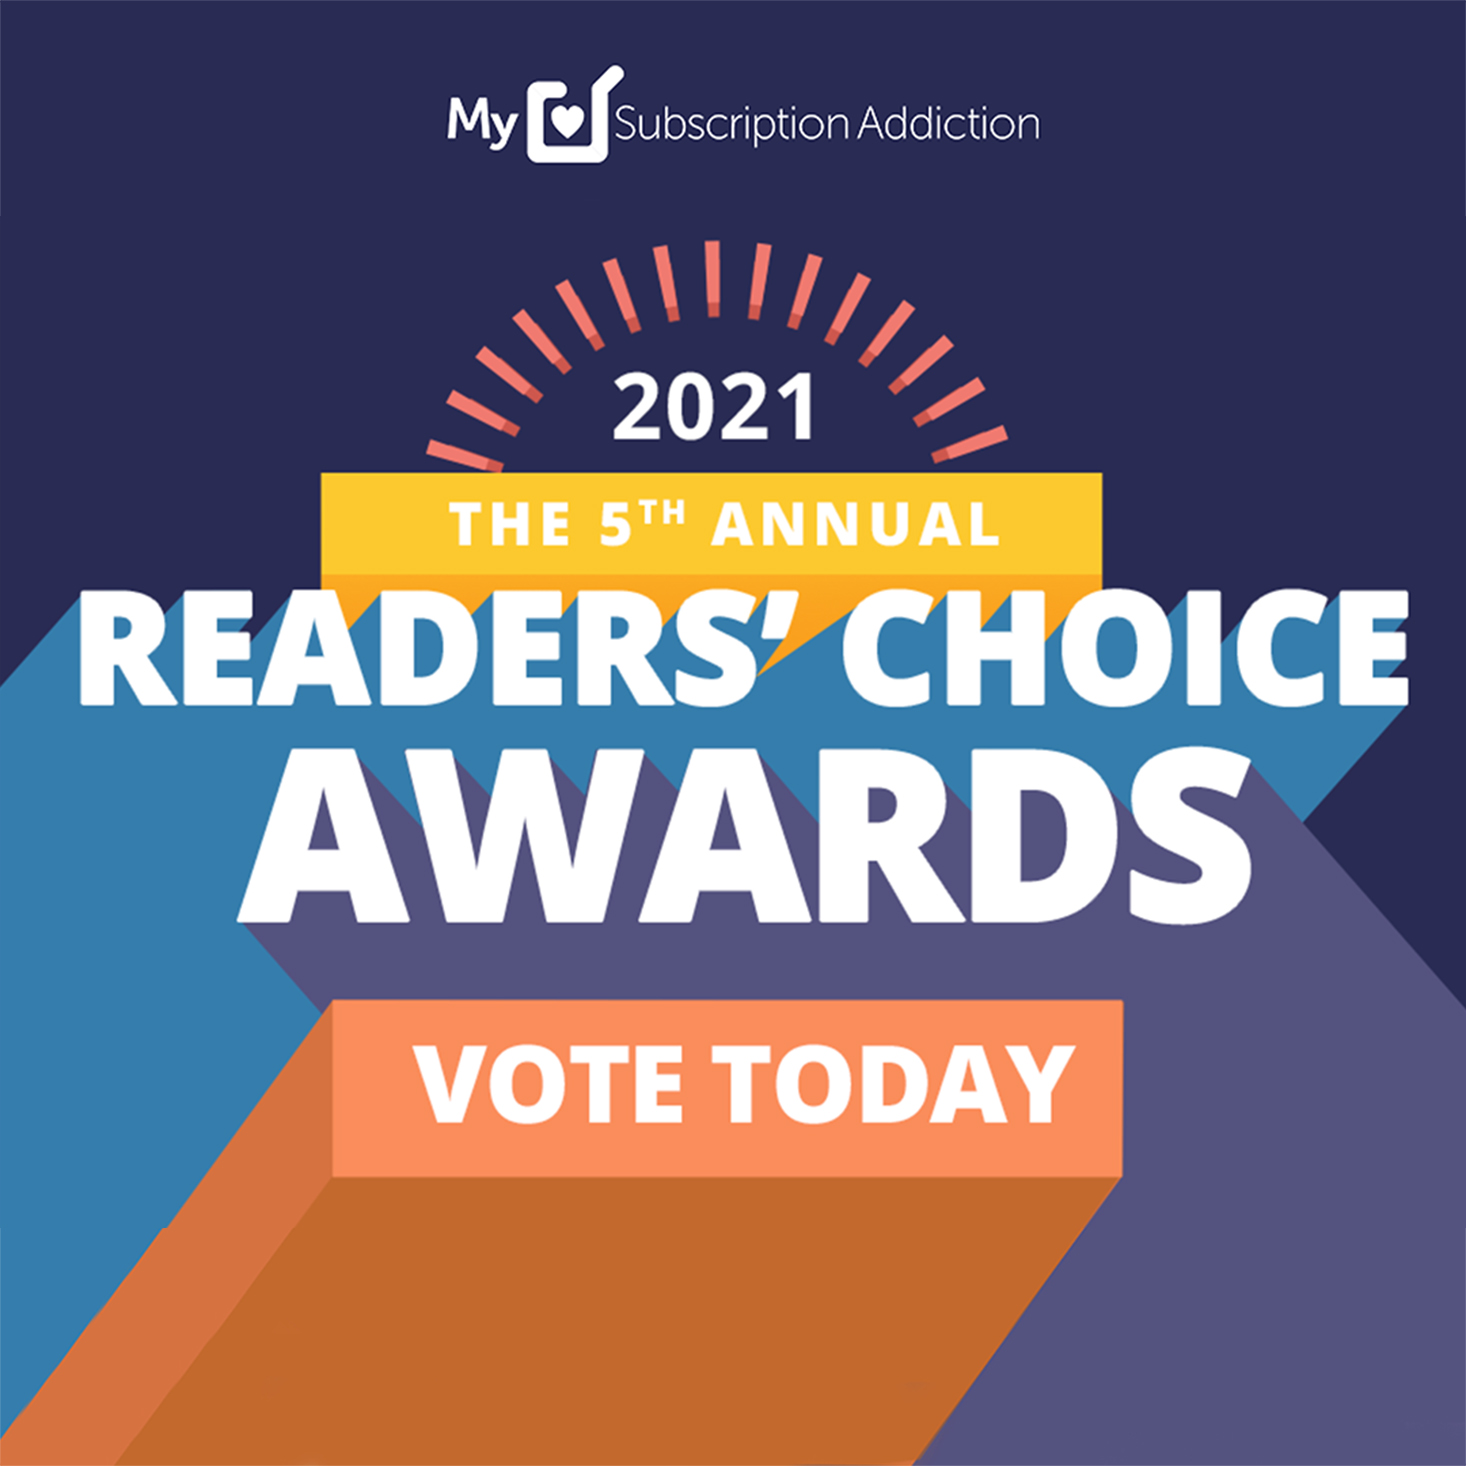 Last Chance to Vote in the Readers’ Choice Awards!